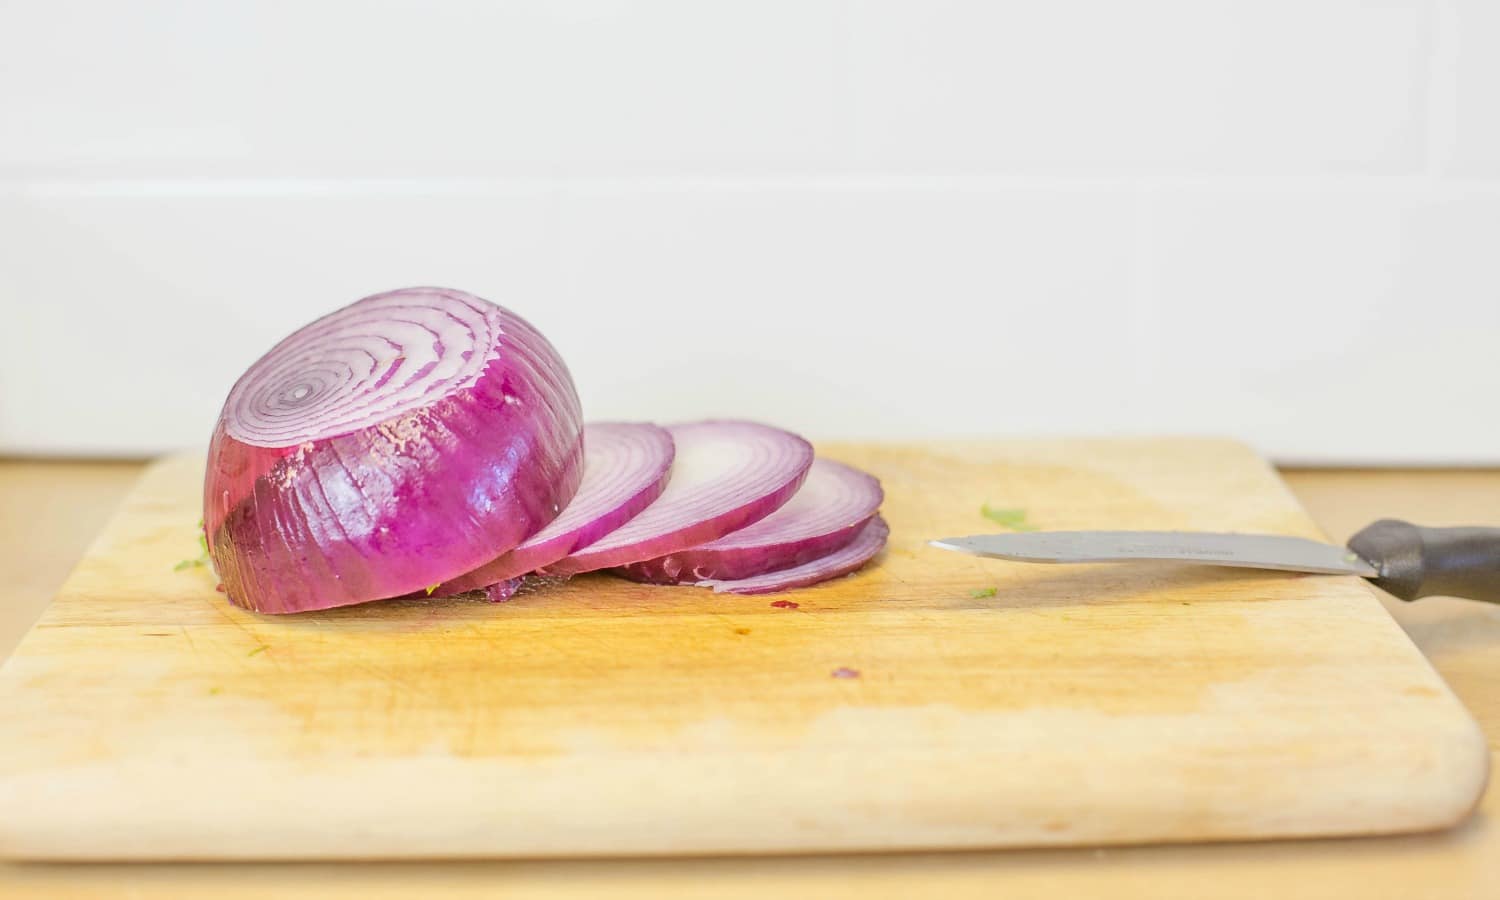 Cut thin slices of red onion and set aside.